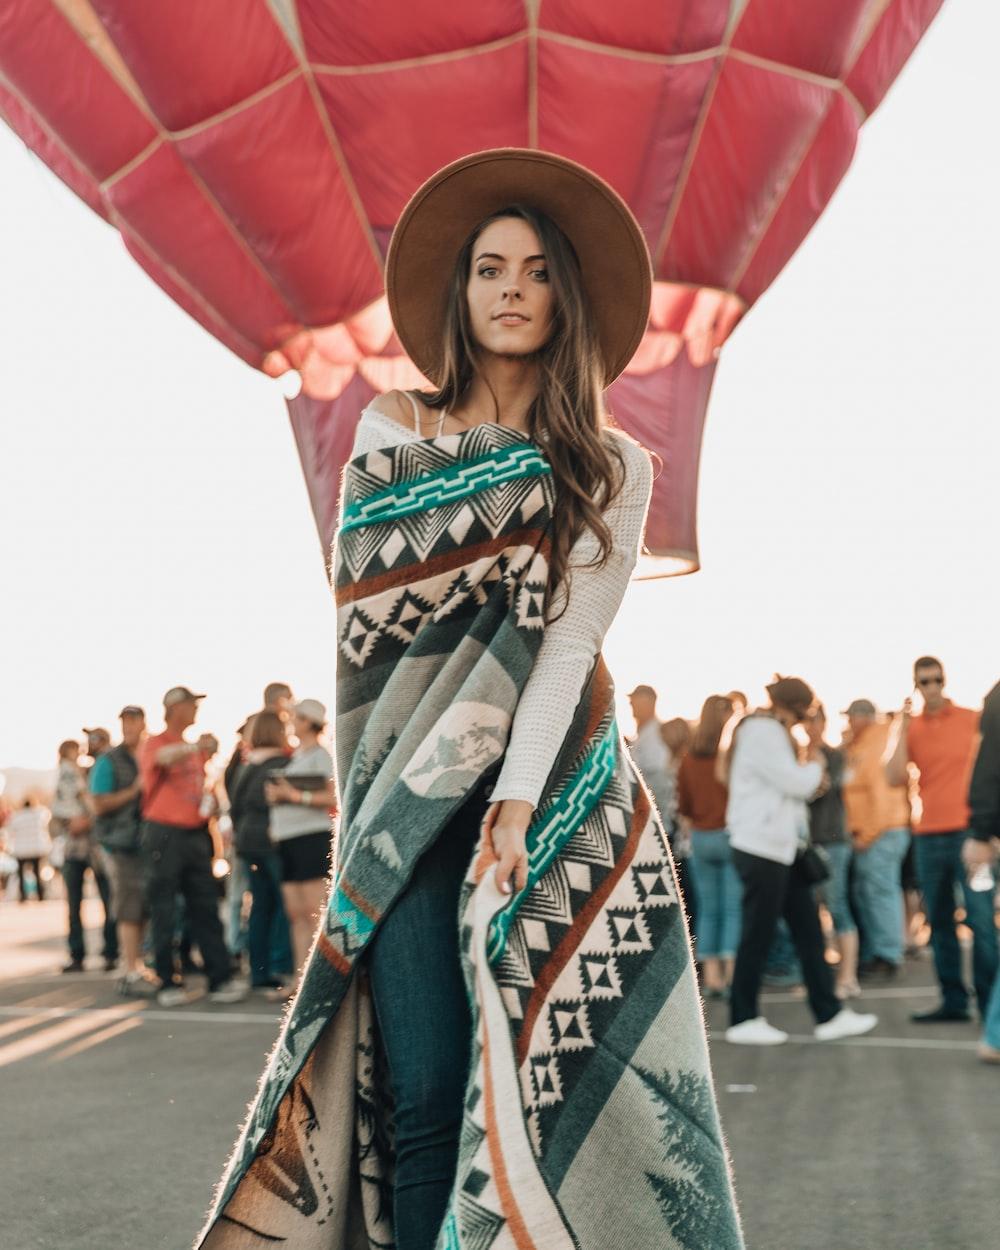 woman wearing brown curved brim cap standing near red hot air balloon